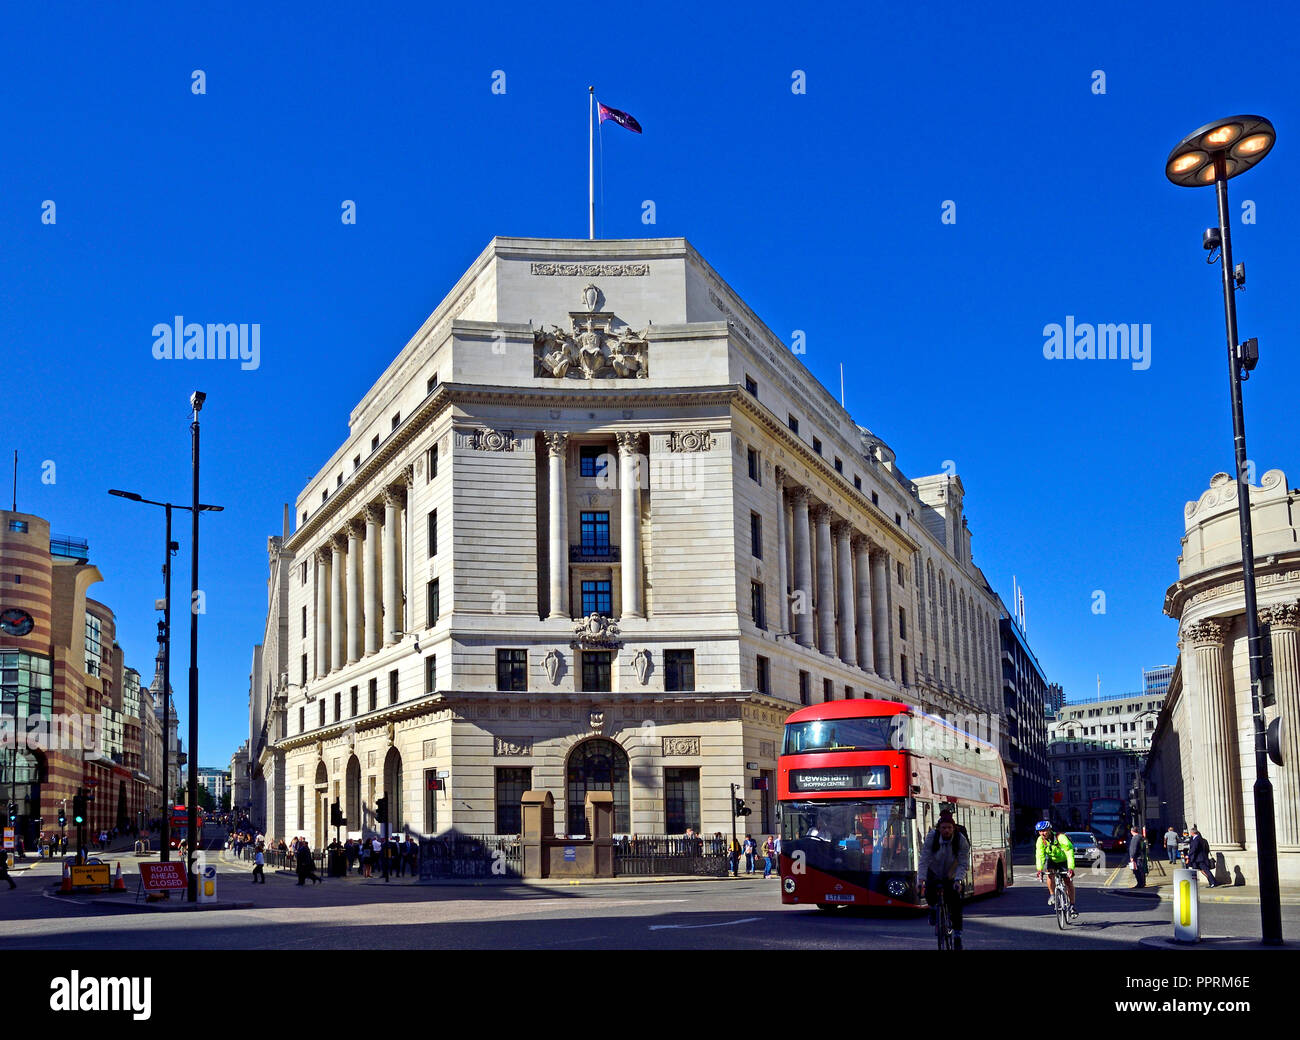 NatWest Bank headquarters in the City of London, England, UK. On the corner of Princes Street and Mansion House Street Stock Photo